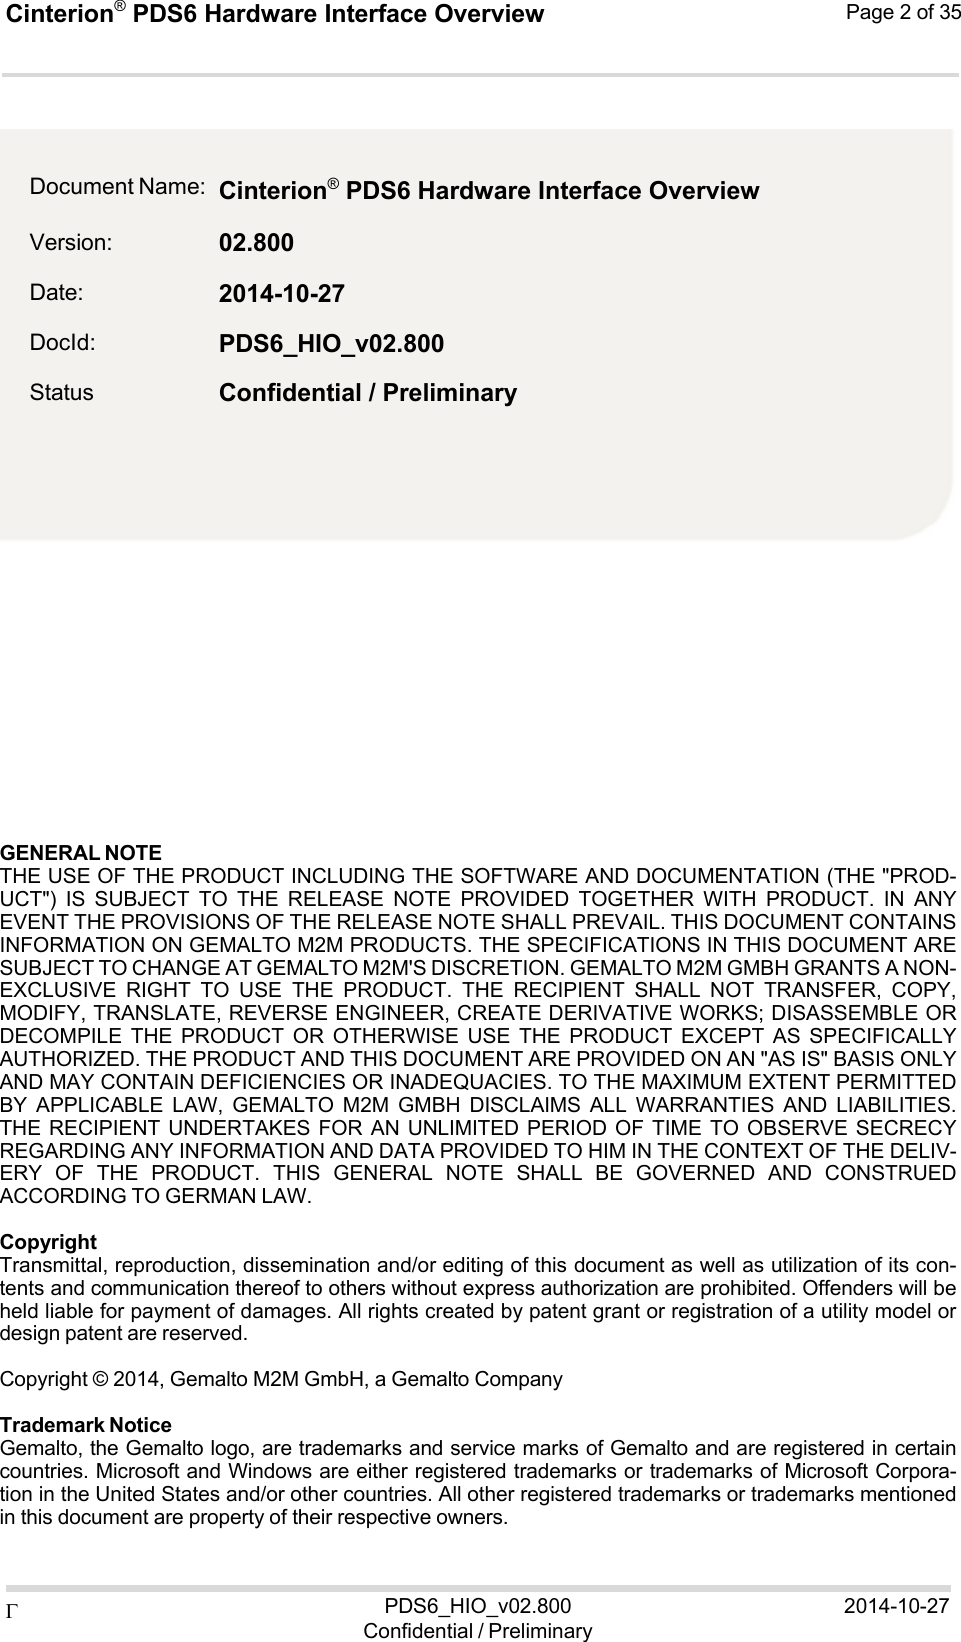 Cinterion®  PDS6 Hardware Interface Overview Page 2 of 35 PDS6_HIO_v02.800Confidential / Preliminary2014-10-27    2                  GENERAL NOTE THE USE OF THE PRODUCT INCLUDING THE SOFTWARE AND DOCUMENTATION (THE &quot;PROD- UCT&quot;)  IS  SUBJECT  TO  THE  RELEASE  NOTE  PROVIDED  TOGETHER  WITH  PRODUCT.  IN  ANY EVENT THE PROVISIONS OF THE RELEASE NOTE SHALL PREVAIL. THIS DOCUMENT CONTAINS INFORMATION ON GEMALTO M2M PRODUCTS. THE SPECIFICATIONS IN THIS DOCUMENT ARE SUBJECT TO CHANGE AT GEMALTO M2M&apos;S DISCRETION. GEMALTO M2M GMBH GRANTS A NON- EXCLUSIVE  RIGHT  TO  USE  THE  PRODUCT.  THE  RECIPIENT  SHALL  NOT  TRANSFER,  COPY, MODIFY, TRANSLATE, REVERSE ENGINEER, CREATE DERIVATIVE WORKS; DISASSEMBLE OR DECOMPILE  THE  PRODUCT  OR  OTHERWISE  USE  THE  PRODUCT  EXCEPT  AS  SPECIFICALLY AUTHORIZED. THE PRODUCT AND THIS DOCUMENT ARE PROVIDED ON AN &quot;AS IS&quot; BASIS ONLY AND MAY CONTAIN DEFICIENCIES OR INADEQUACIES. TO THE MAXIMUM EXTENT PERMITTED BY  APPLICABLE  LAW,  GEMALTO  M2M  GMBH  DISCLAIMS  ALL  WARRANTIES  AND  LIABILITIES. THE RECIPIENT UNDERTAKES FOR AN UNLIMITED PERIOD OF  TIME  TO  OBSERVE SECRECY REGARDING ANY INFORMATION AND DATA PROVIDED TO HIM IN THE CONTEXT OF THE DELIV- ERY  OF  THE  PRODUCT.  THIS  GENERAL  NOTE  SHALL  BE  GOVERNED  AND  CONSTRUED ACCORDING TO GERMAN LAW.  Copyright Transmittal, reproduction, dissemination and/or editing of this document as well as utilization of its con- tents and communication thereof to others without express authorization are prohibited. Offenders will be held liable for payment of damages. All rights created by patent grant or registration of a utility model or design patent are reserved.  Copyright © 2014, Gemalto M2M GmbH, a Gemalto Company  Trademark Notice Gemalto, the Gemalto logo, are trademarks and service marks of Gemalto and are registered in certain countries. Microsoft and Windows are either registered trademarks or trademarks of Microsoft Corpora- tion in the United States and/or other countries. All other registered trademarks or trademarks mentioned in this document are property of their respective owners. Document Name: Version: Date: DocId: Status Cinterion® PDS6 Hardware Interface Overview 02.800 2014-10-27 PDS6_HIO_v02.800 Confidential / Preliminary 